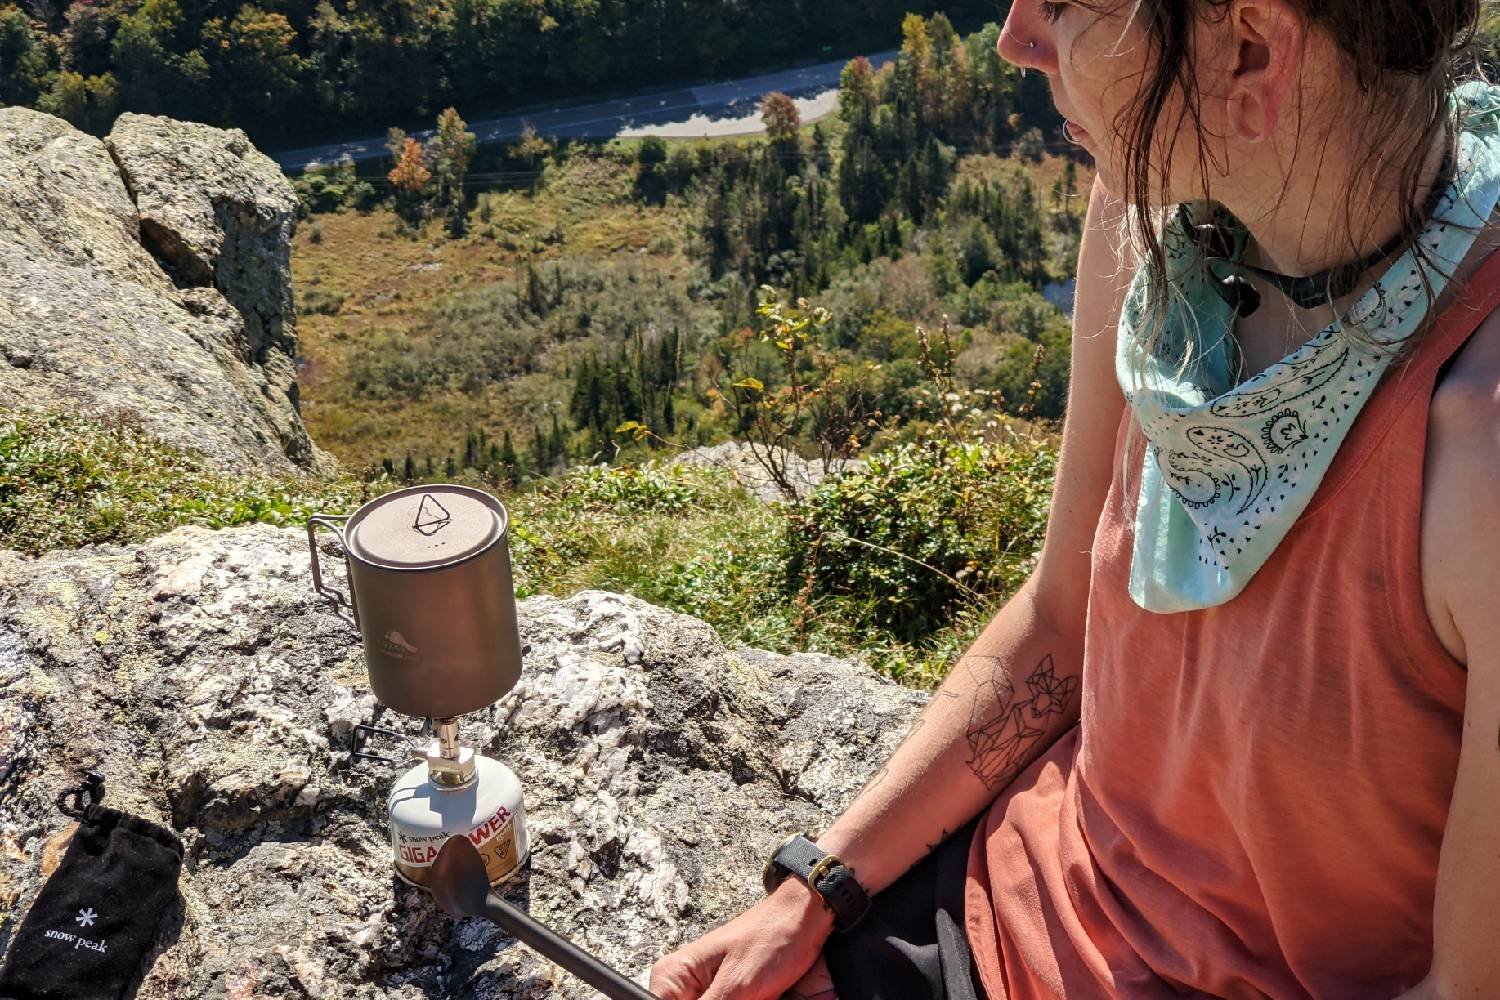 A hiker sitting on a ledge cooking on a backpacking stove